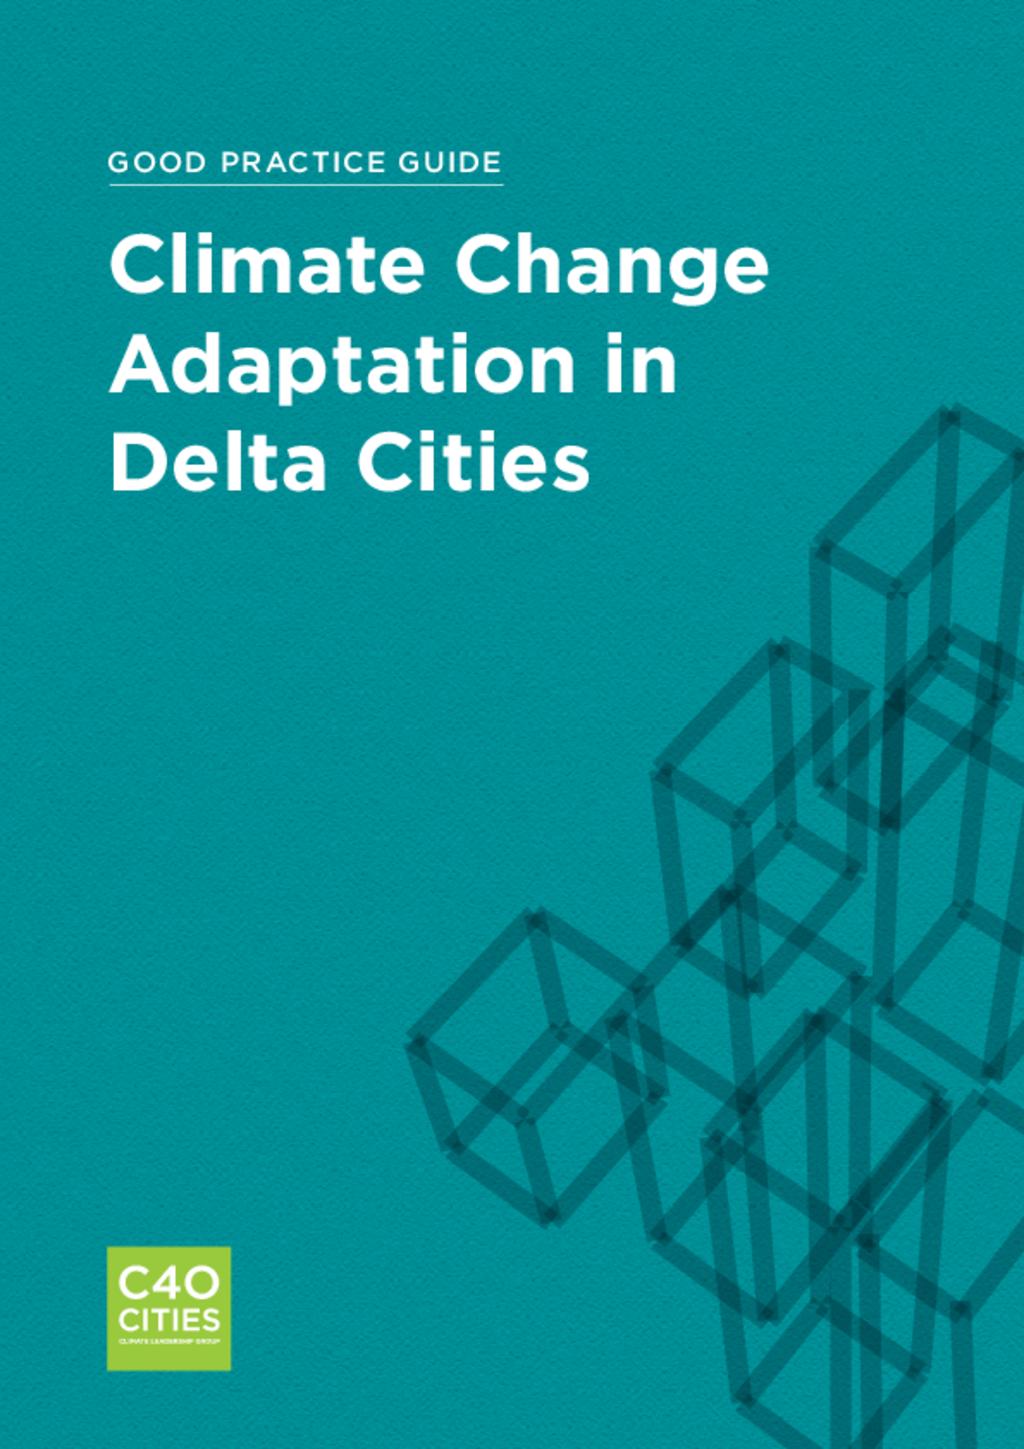 Good Practice Guide - Climate Change Adaptation in Delta Cities